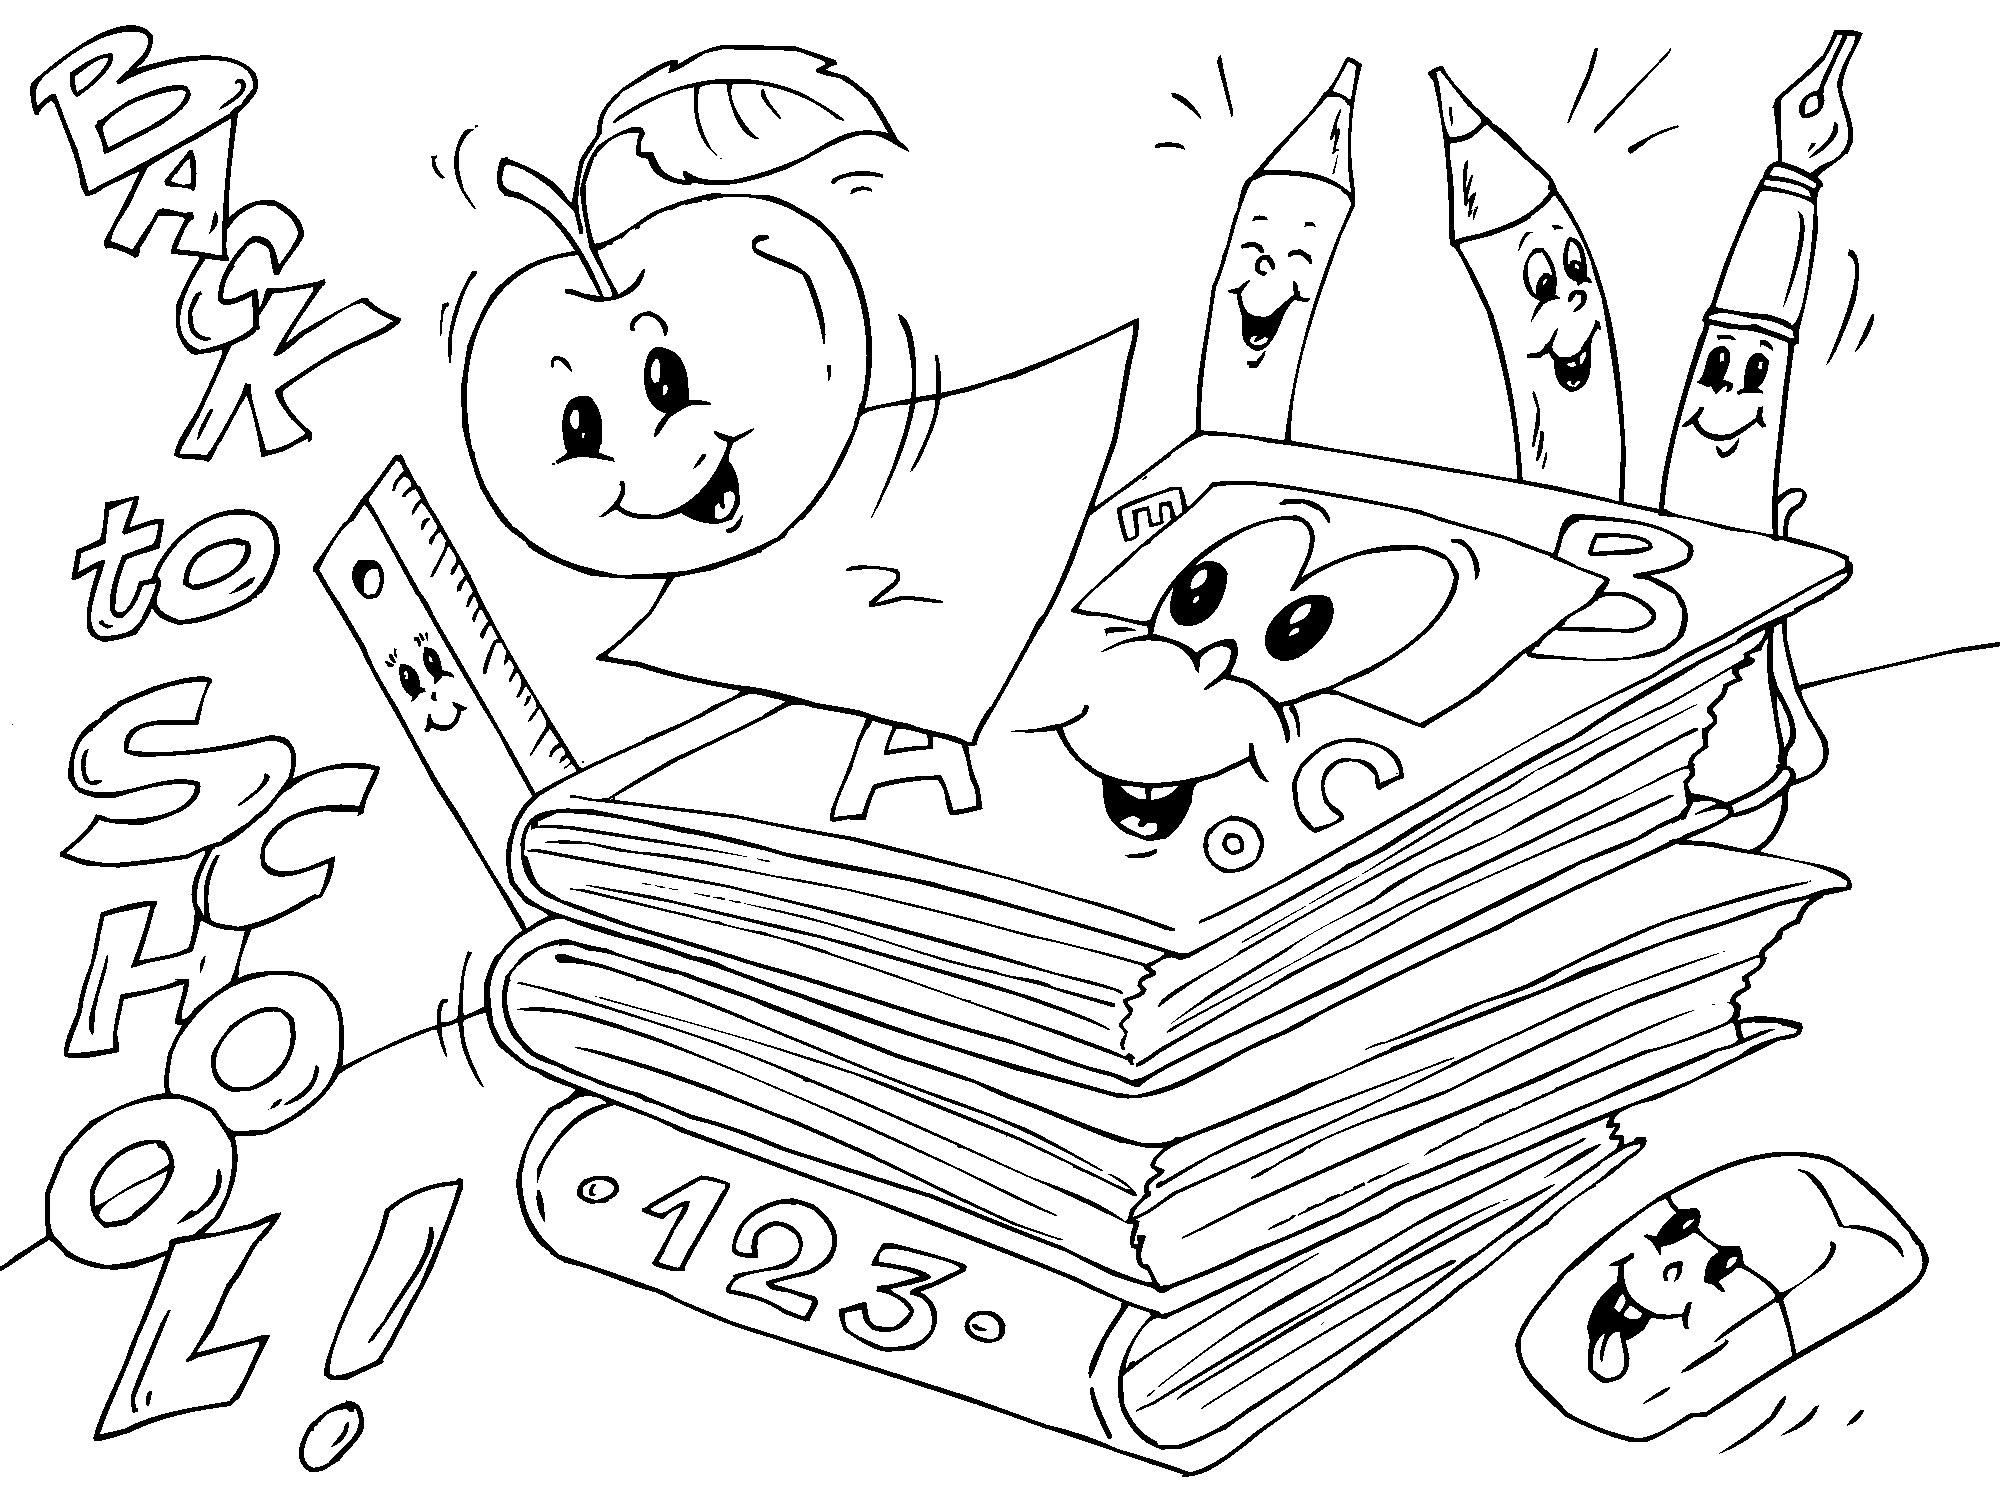 Coloring page back to school